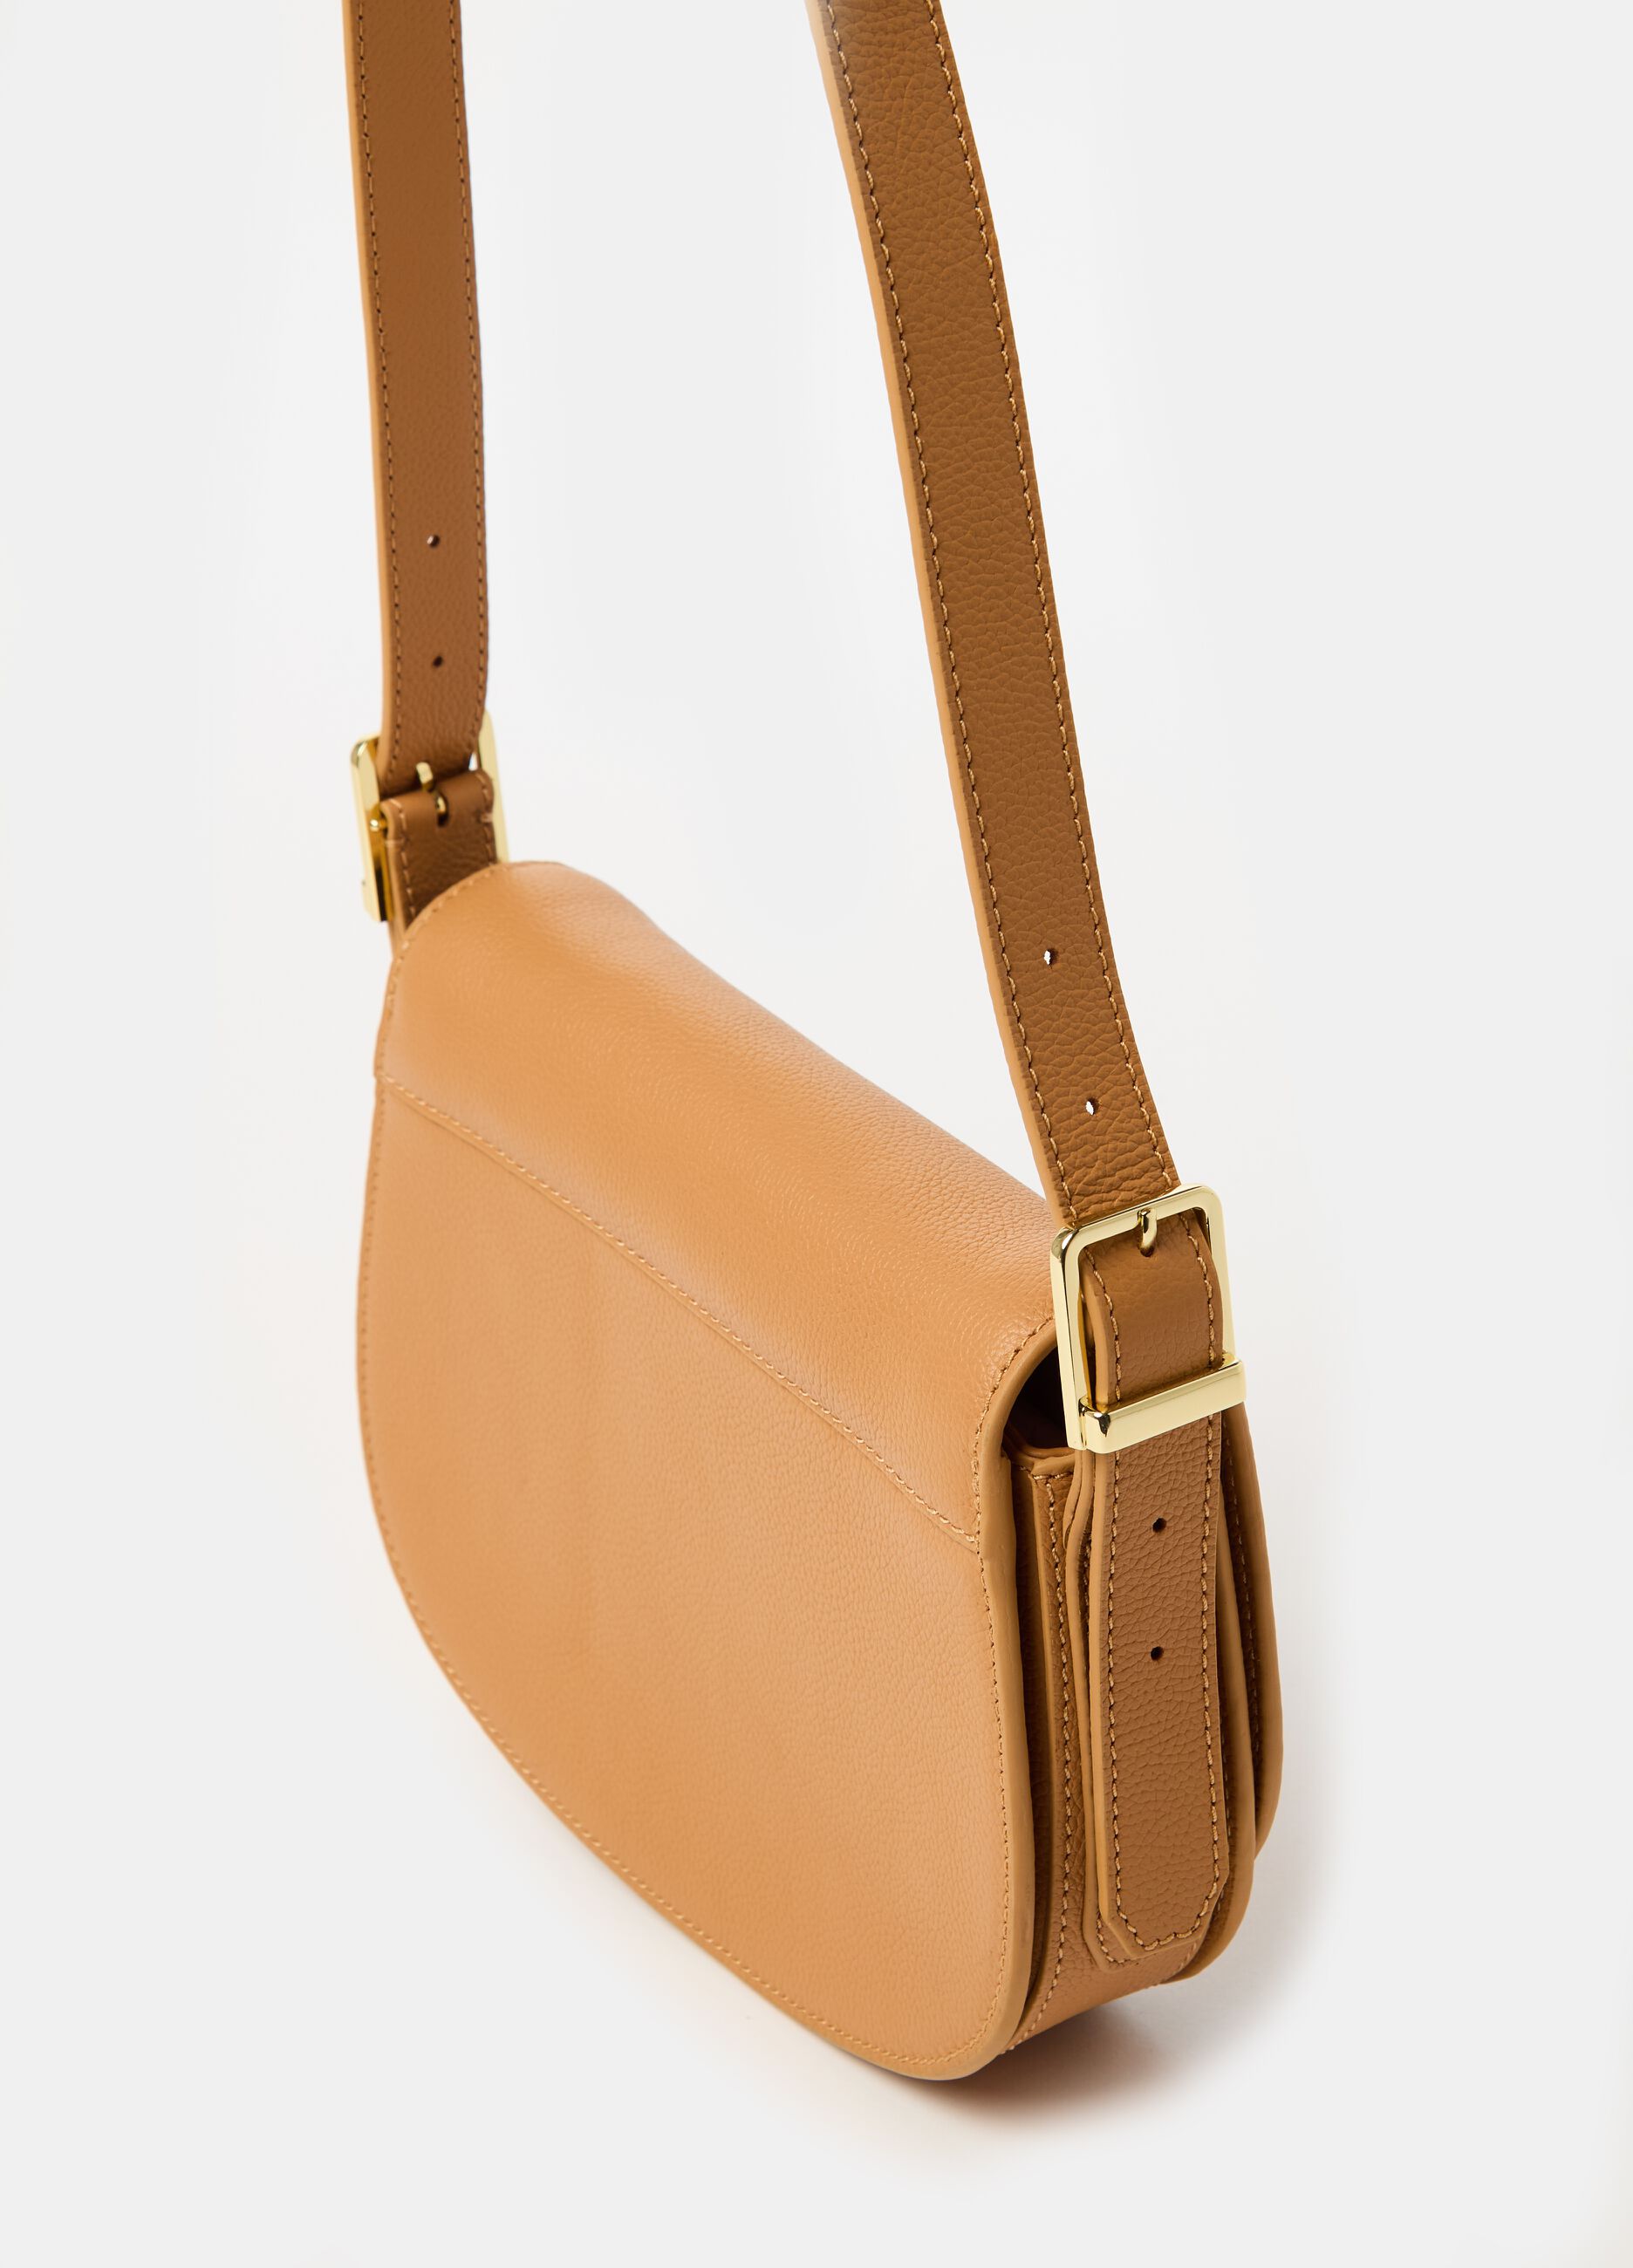 Contemporary messenger bag in leather